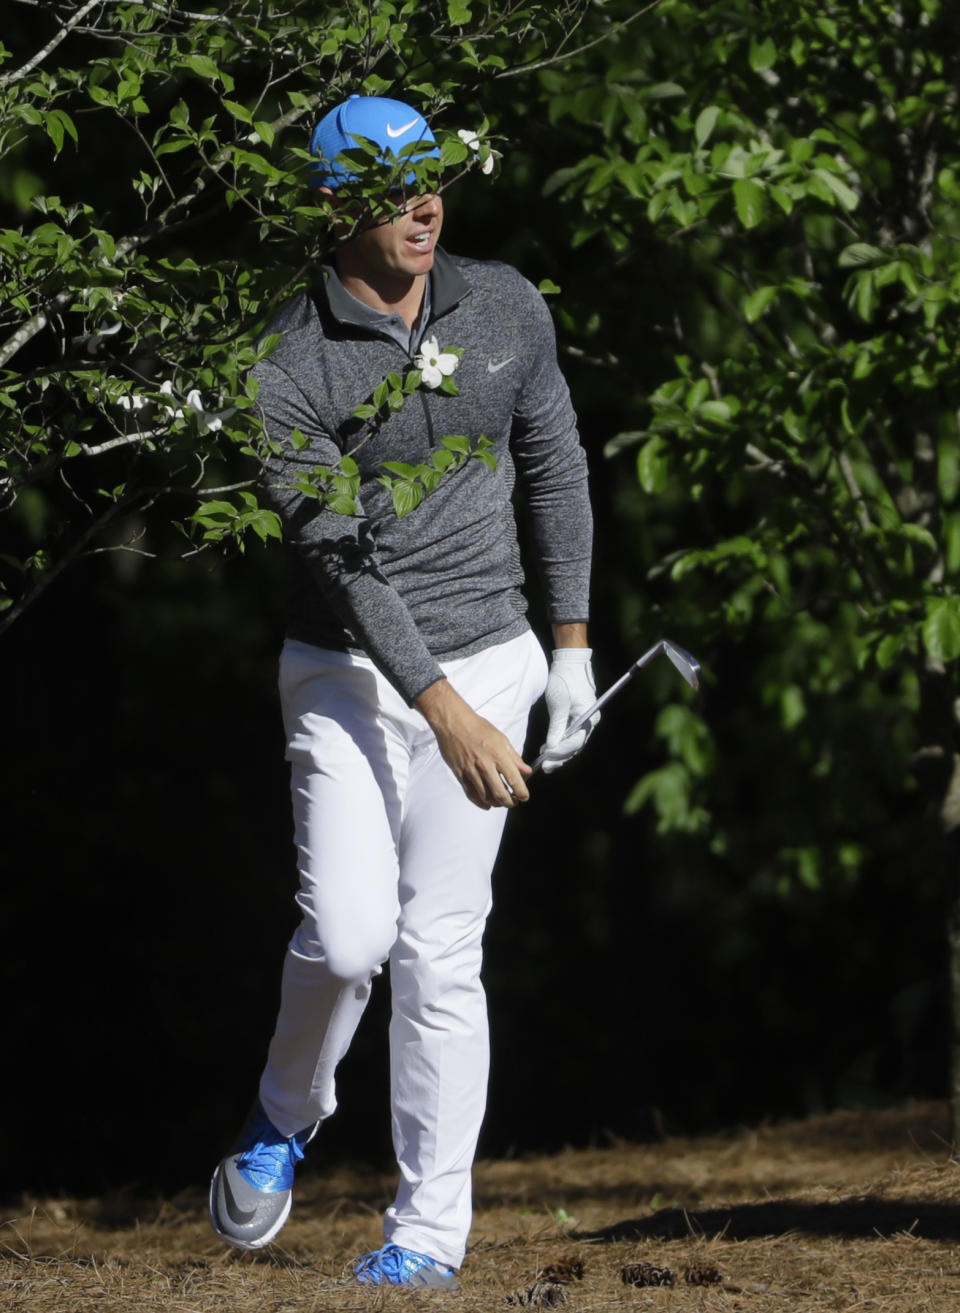 Rory McIlroy, of Northern Ireland, looks at his shot out of the pine straw on the 11th hole during the third round of the Masters golf tournament Saturday, April 9, 2016, in Augusta, Ga. (AP Photo/Chris Carlson)